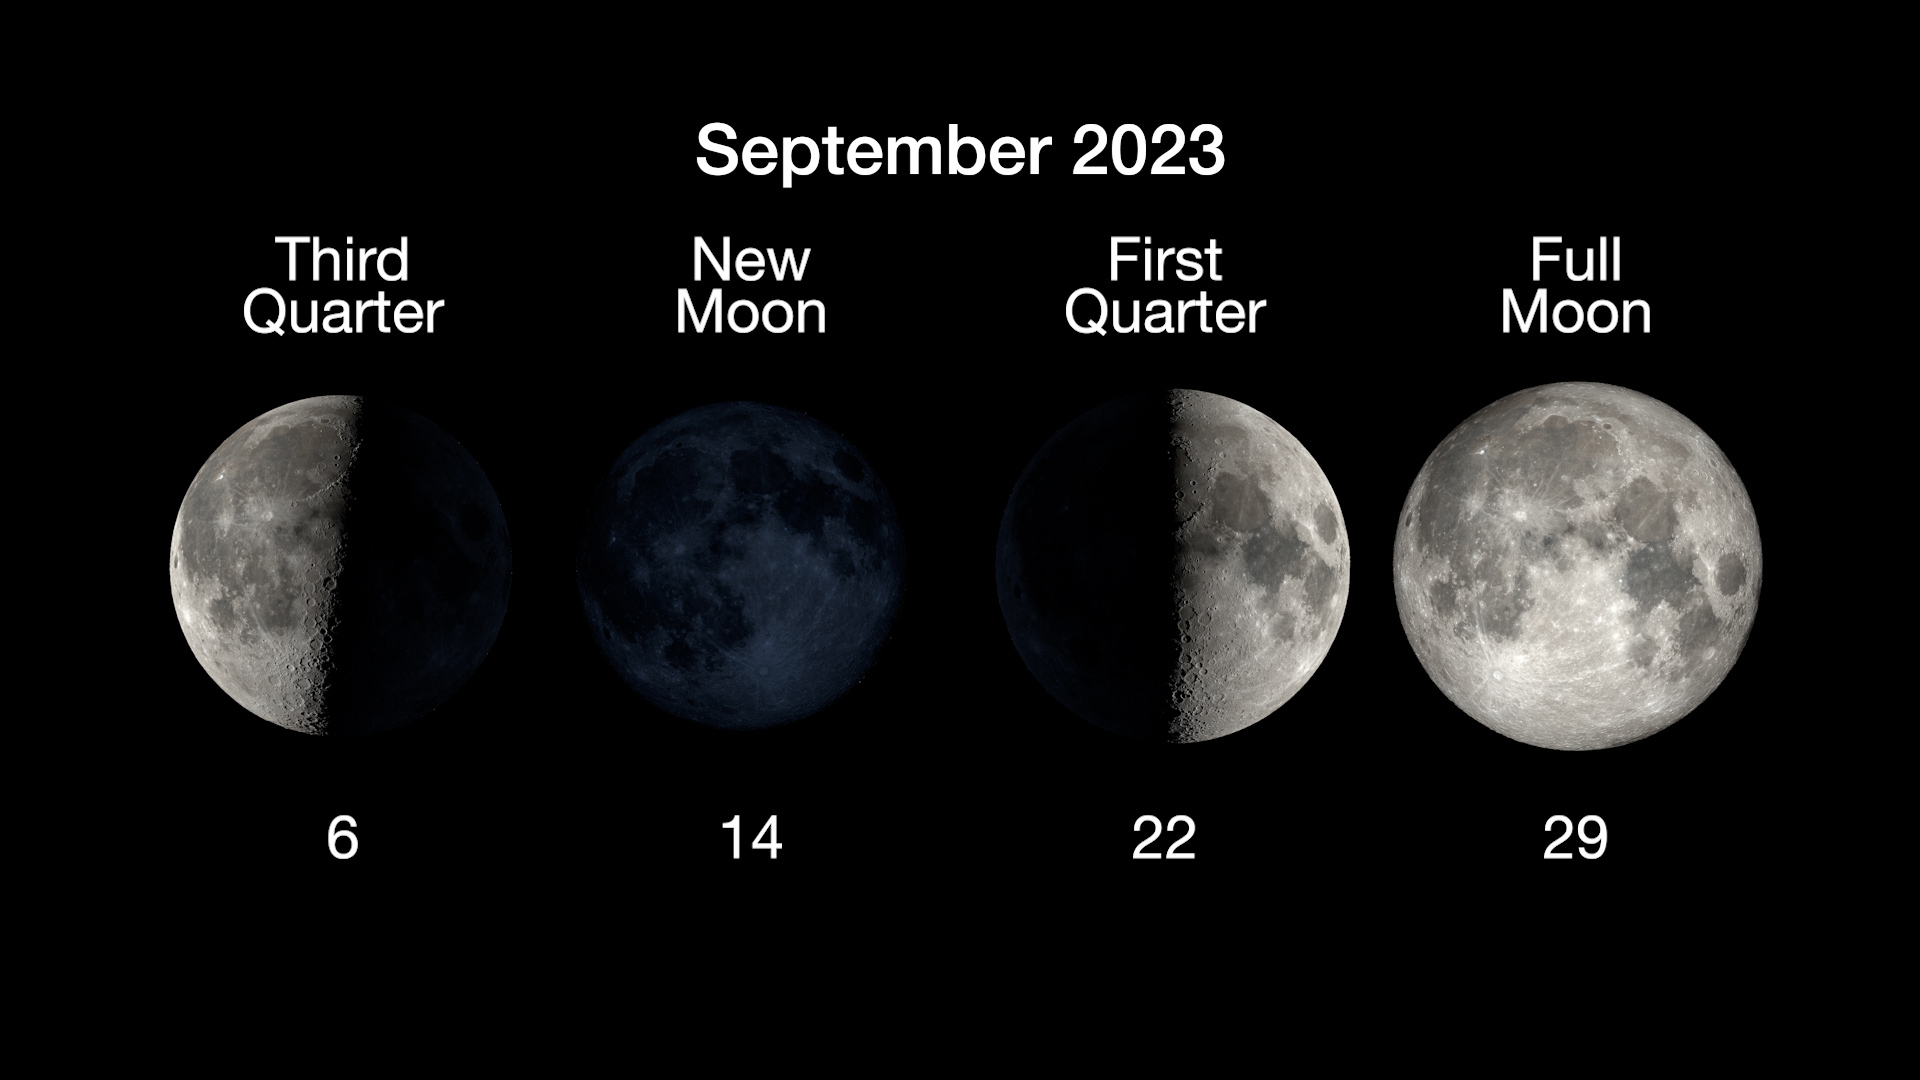 The main phases of the Moon are illustrated in a horizontal row, with the third quarter moon on September 6, new moon on September 14, first quarter on September 22, and full moon on September 29.